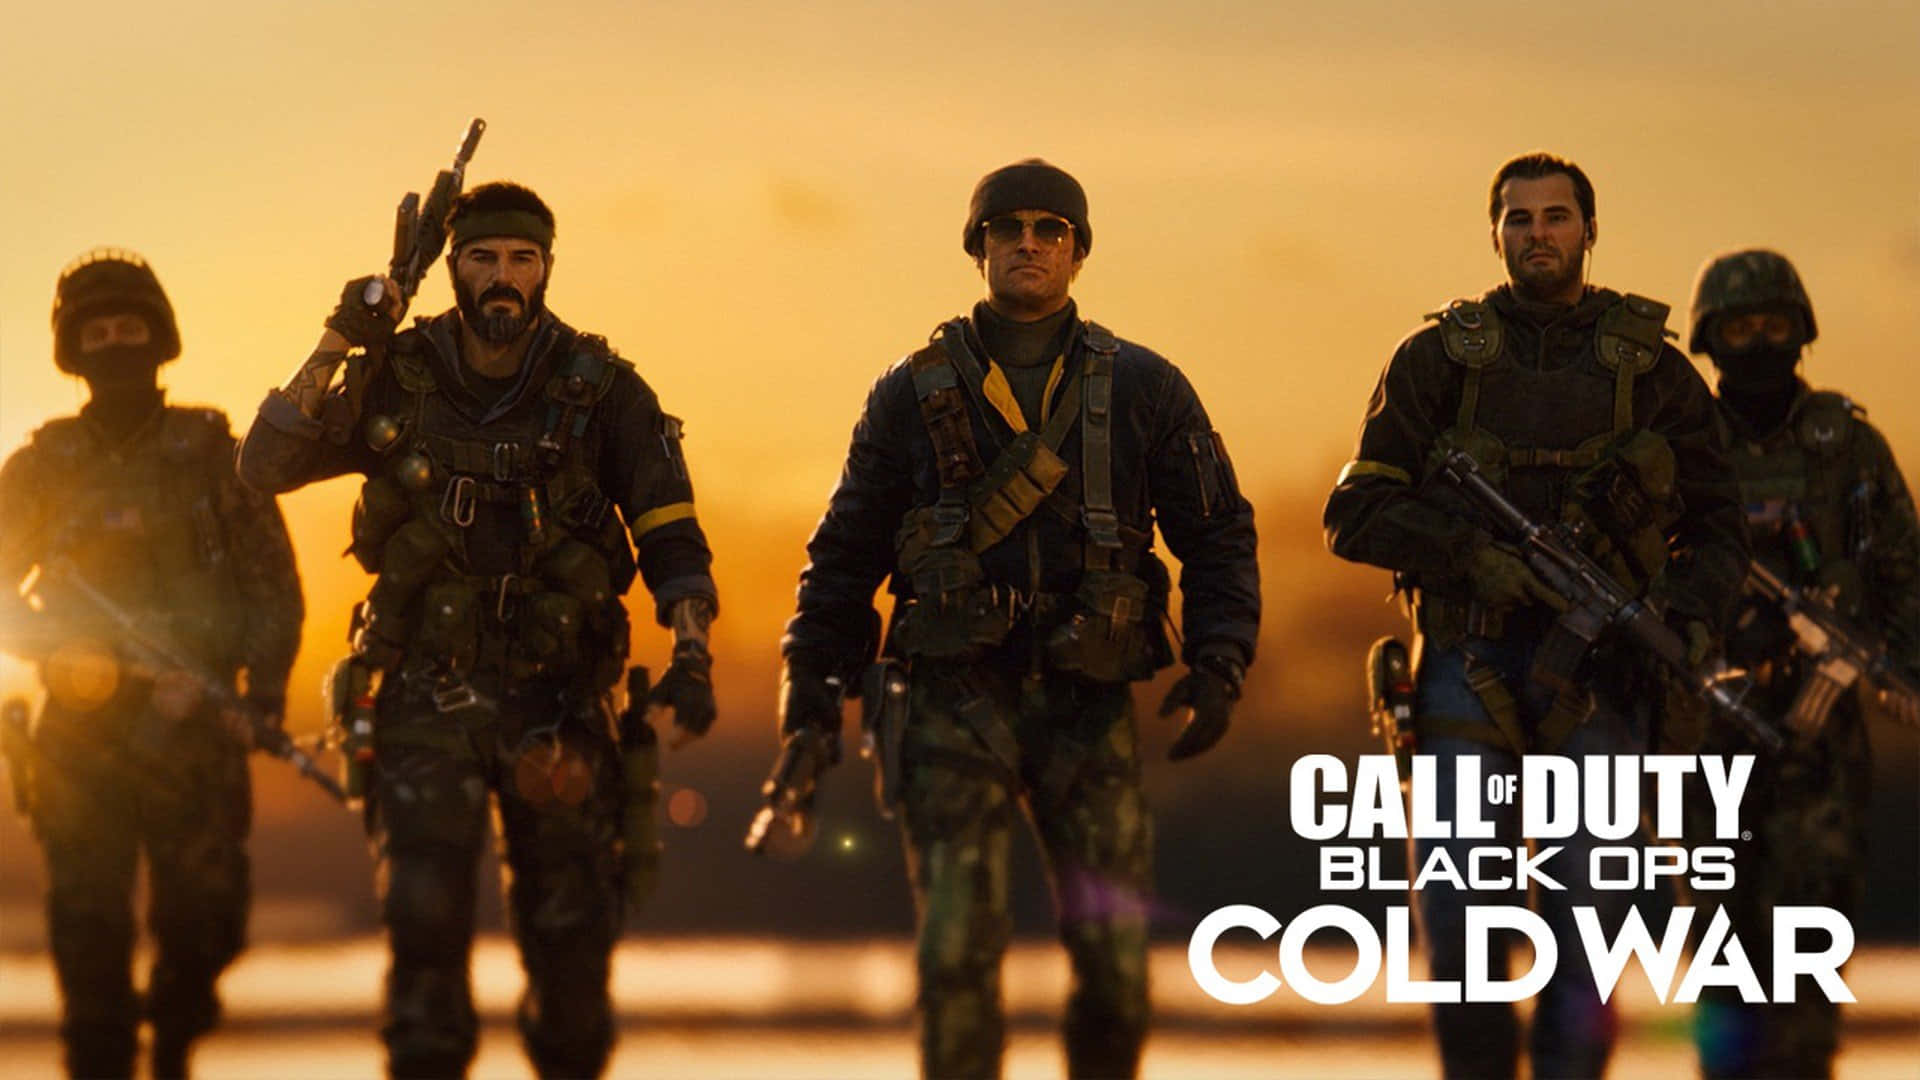 Frank Woods - Call of Duty Character Wallpaper